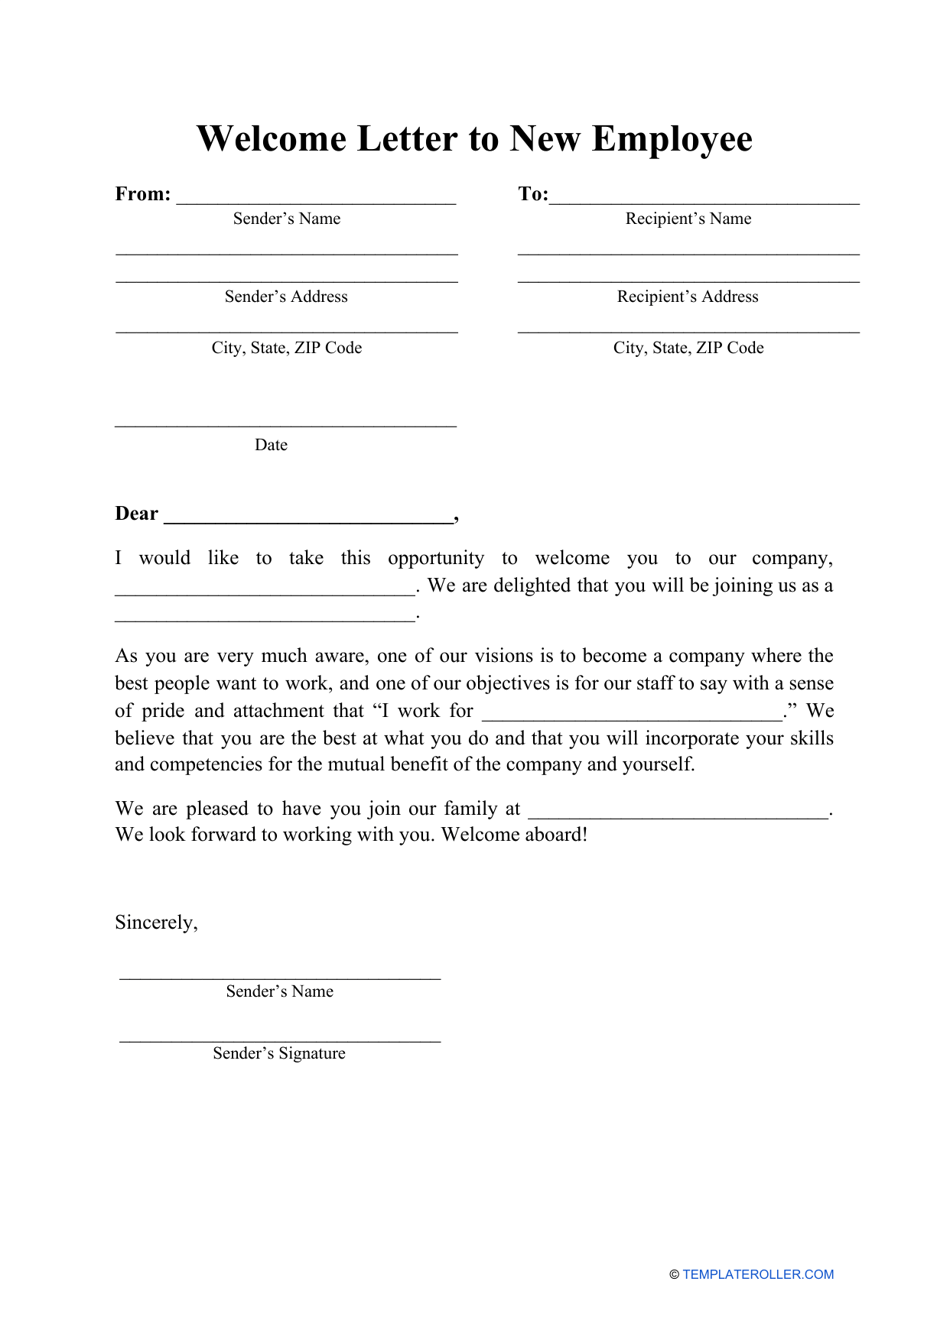 welcome-letter-to-new-employee-template-fill-out-sign-online-and